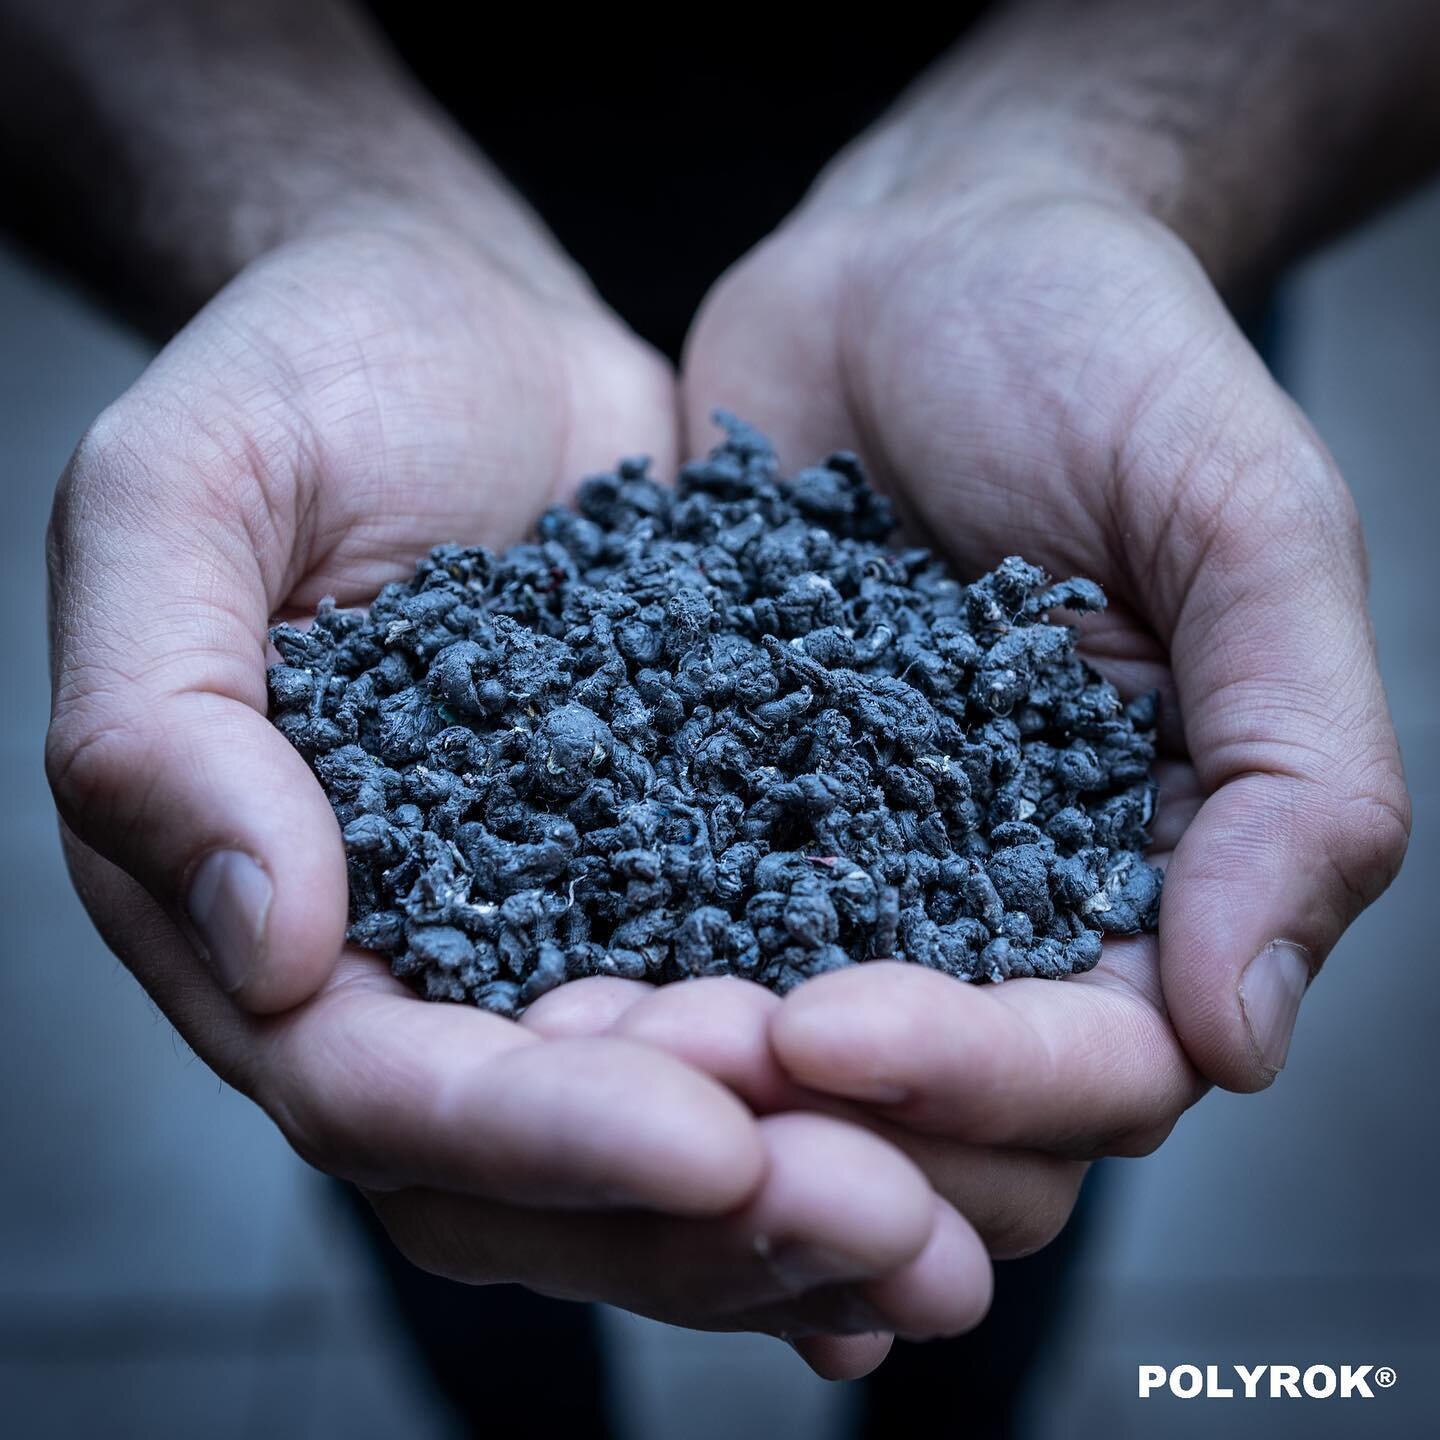 Just a wee bit pumped to be working with these legends in the sustainability space. 
Polyrok is a repurposed plastic aggregate usable in an industrial concrete mix. 
At the end of the concrete life, the plastic can be extracted and recycled. 

And, t